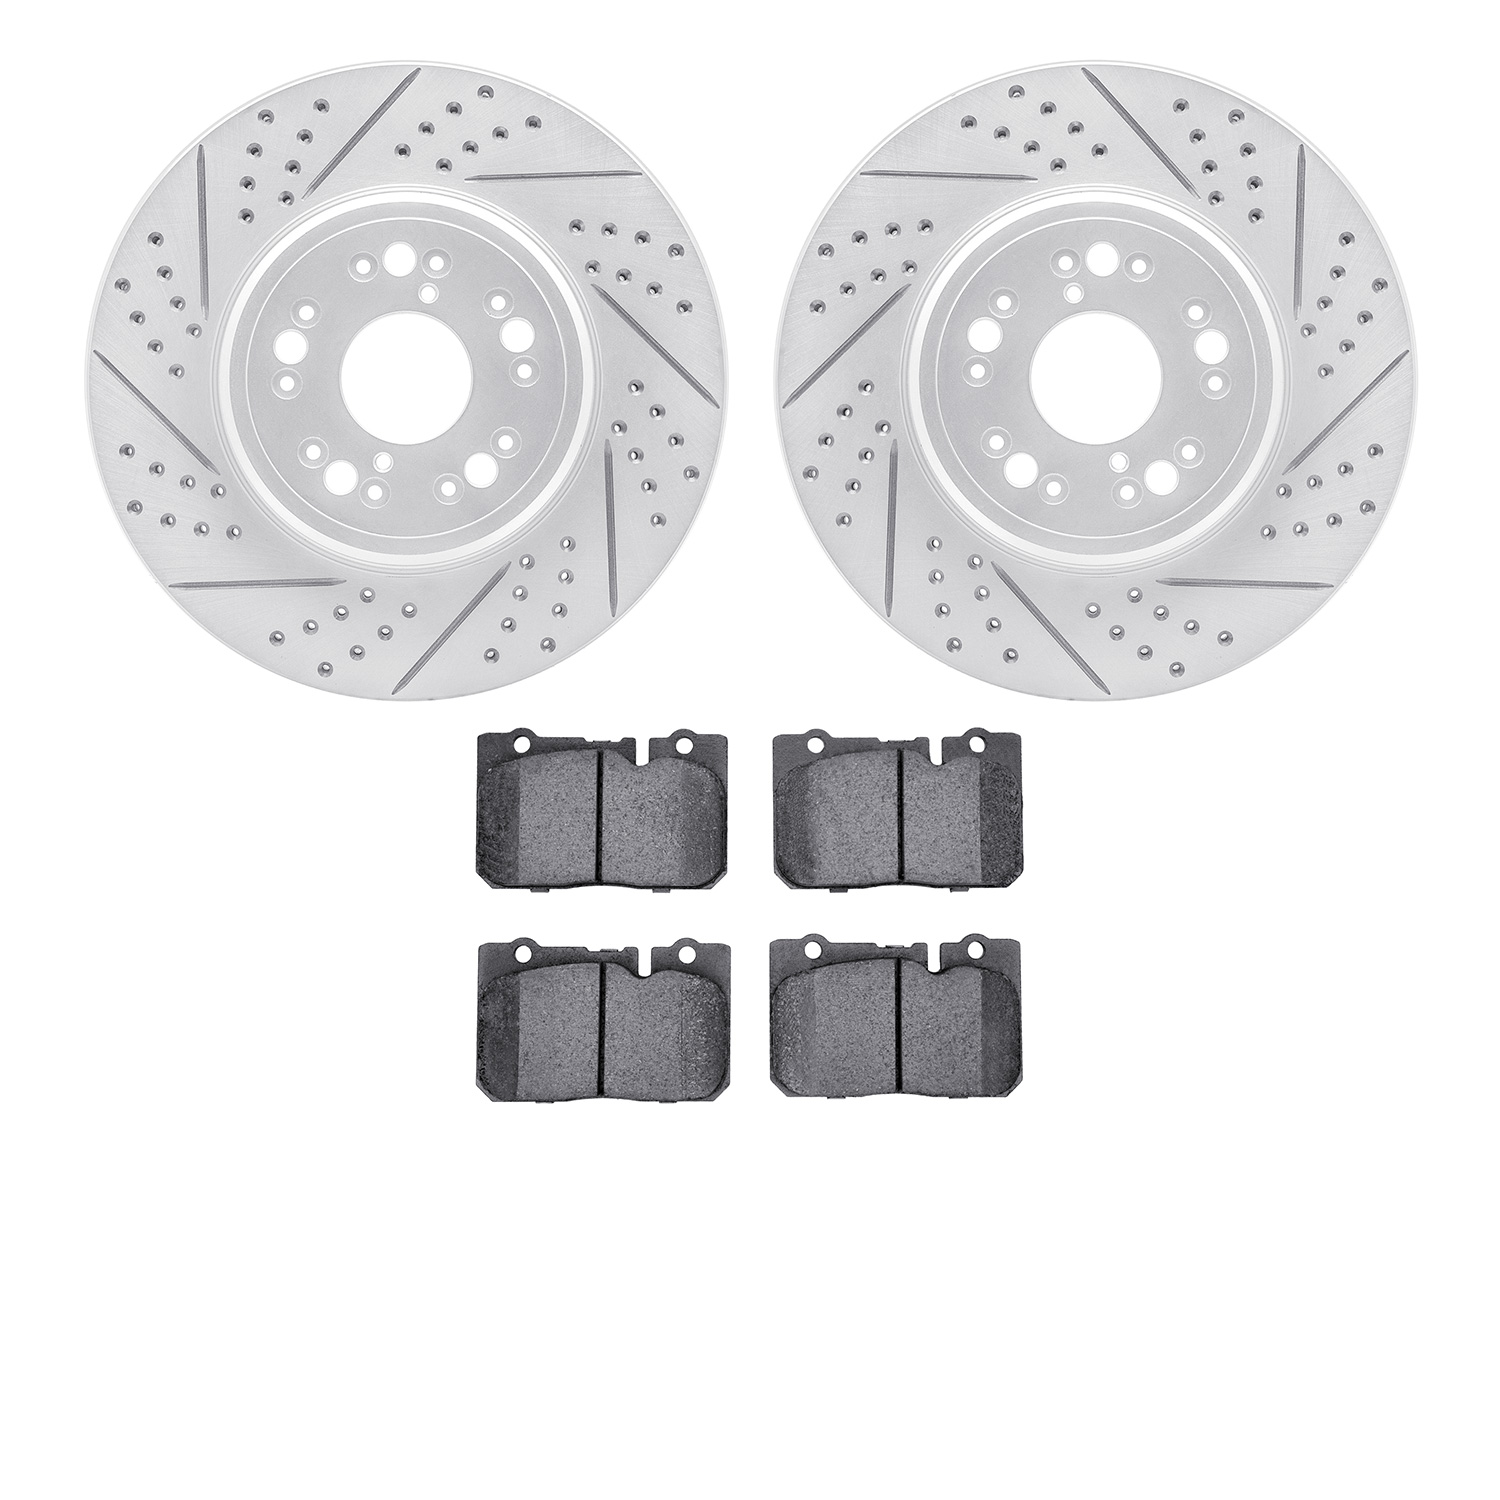 2502-75006 Geoperformance Drilled/Slotted Rotors w/5000 Advanced Brake Pads Kit, 1995-2000 Lexus/Toyota/Scion, Position: Front